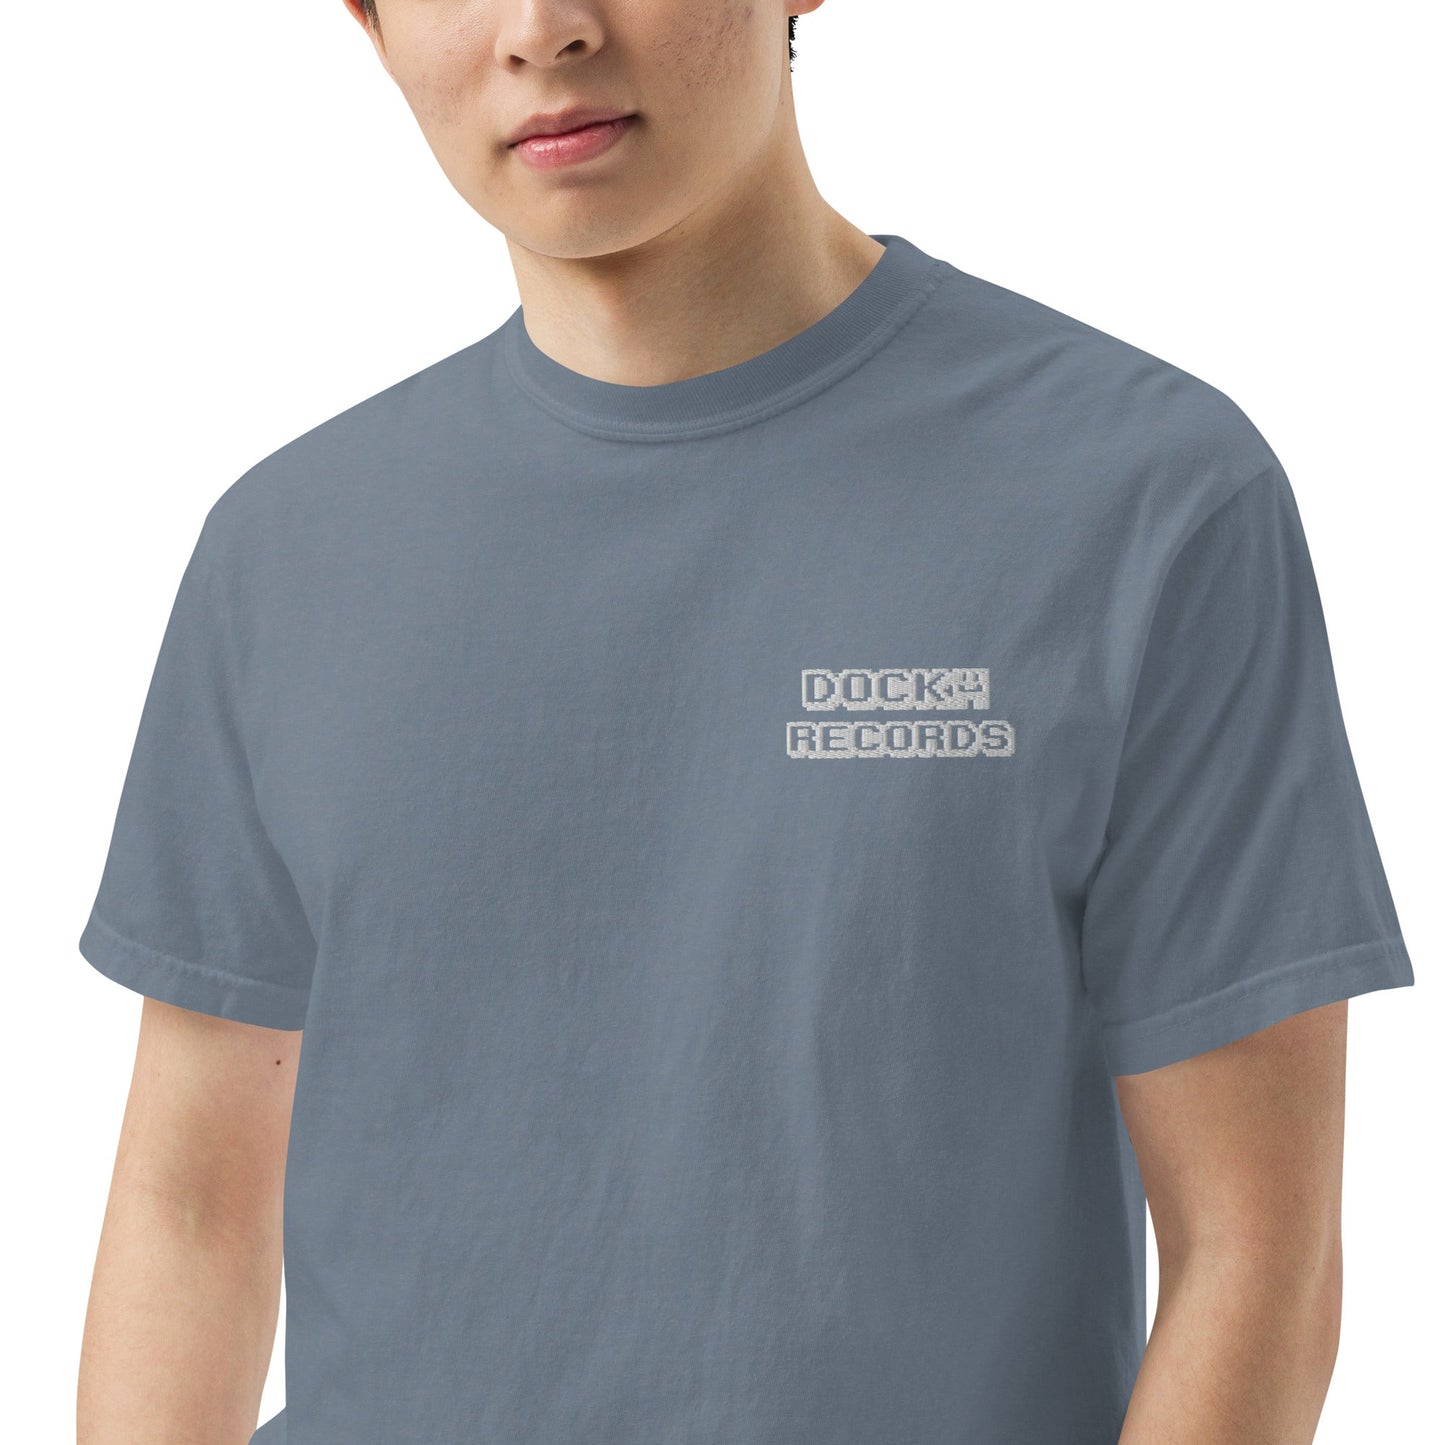 Docka Records Unisex Garment-dyed Heavyweight Embroidered T-shirt - BeExtra! Apparel & More